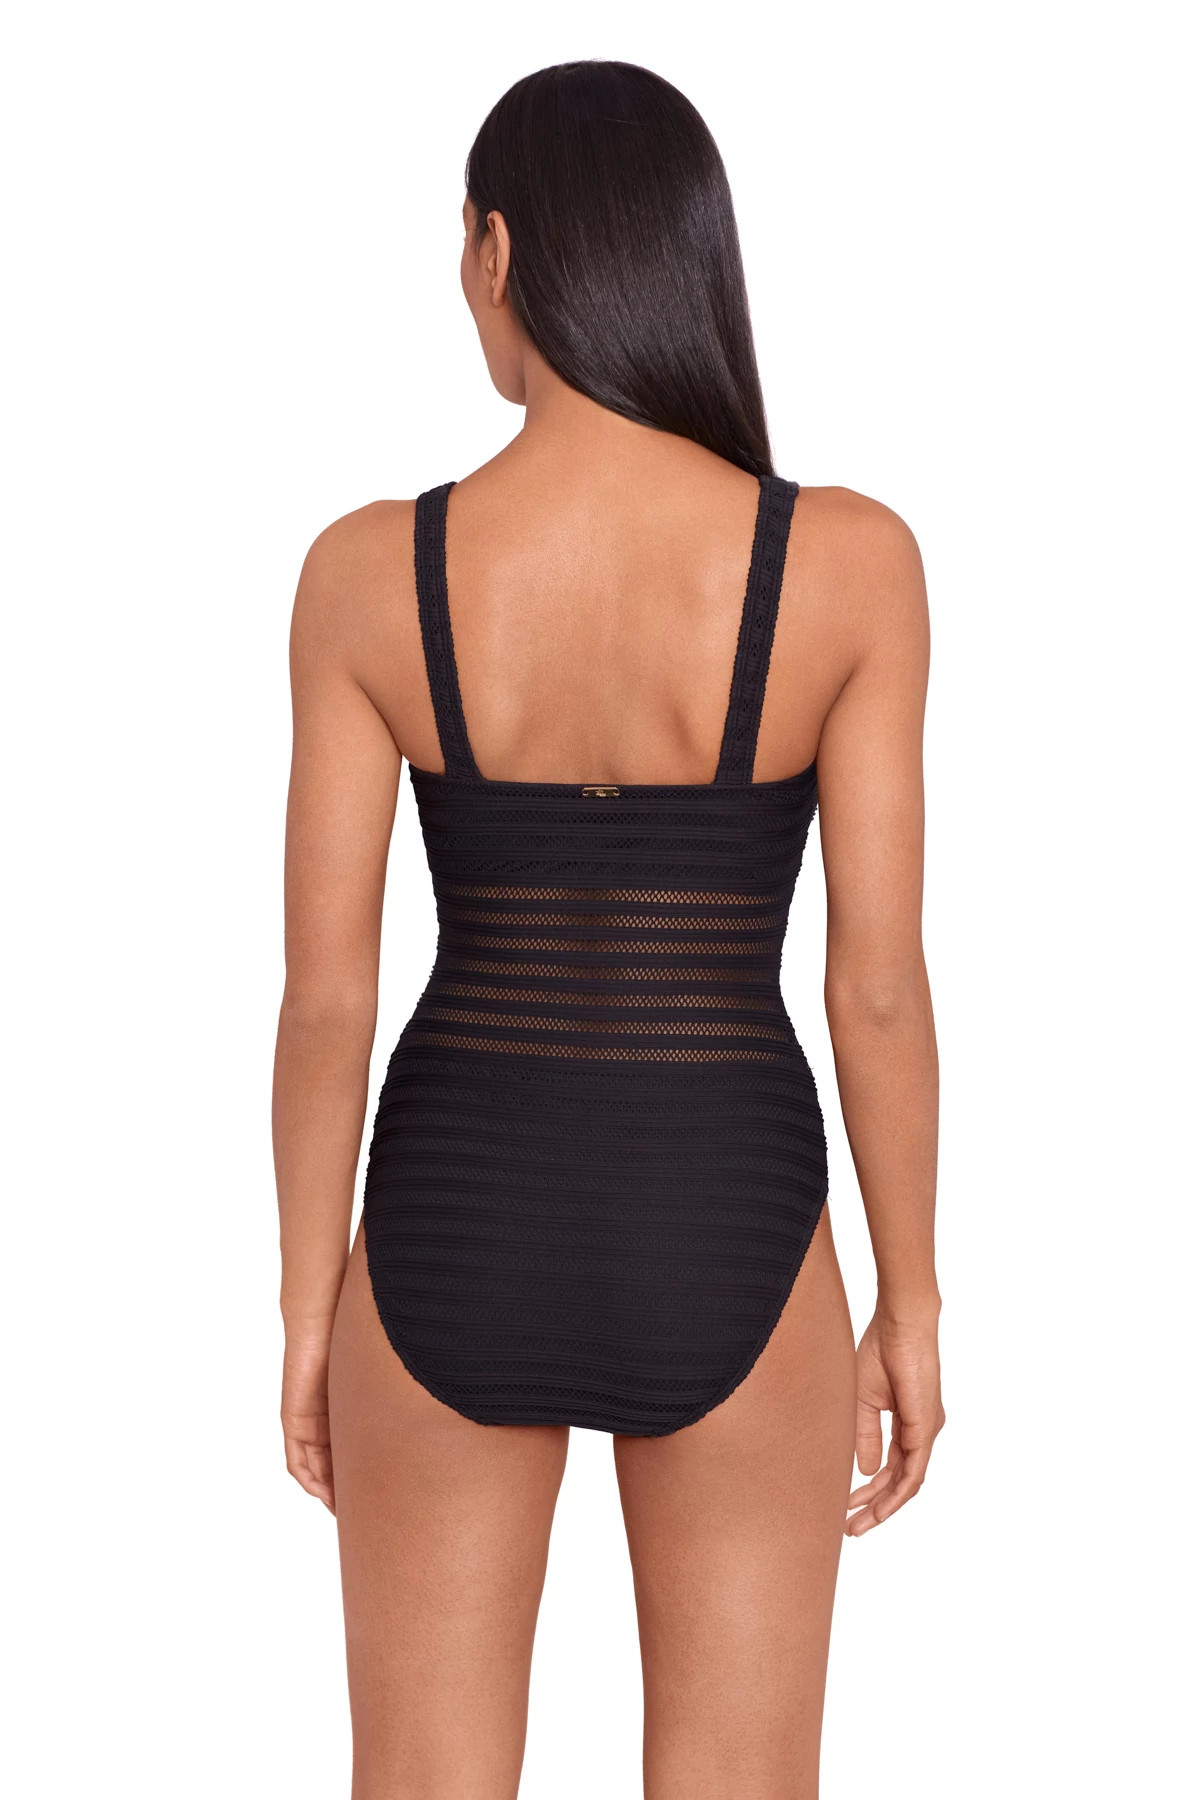 BLACK Mesh Over The Shoulder One Piece Swimsuit image number 2